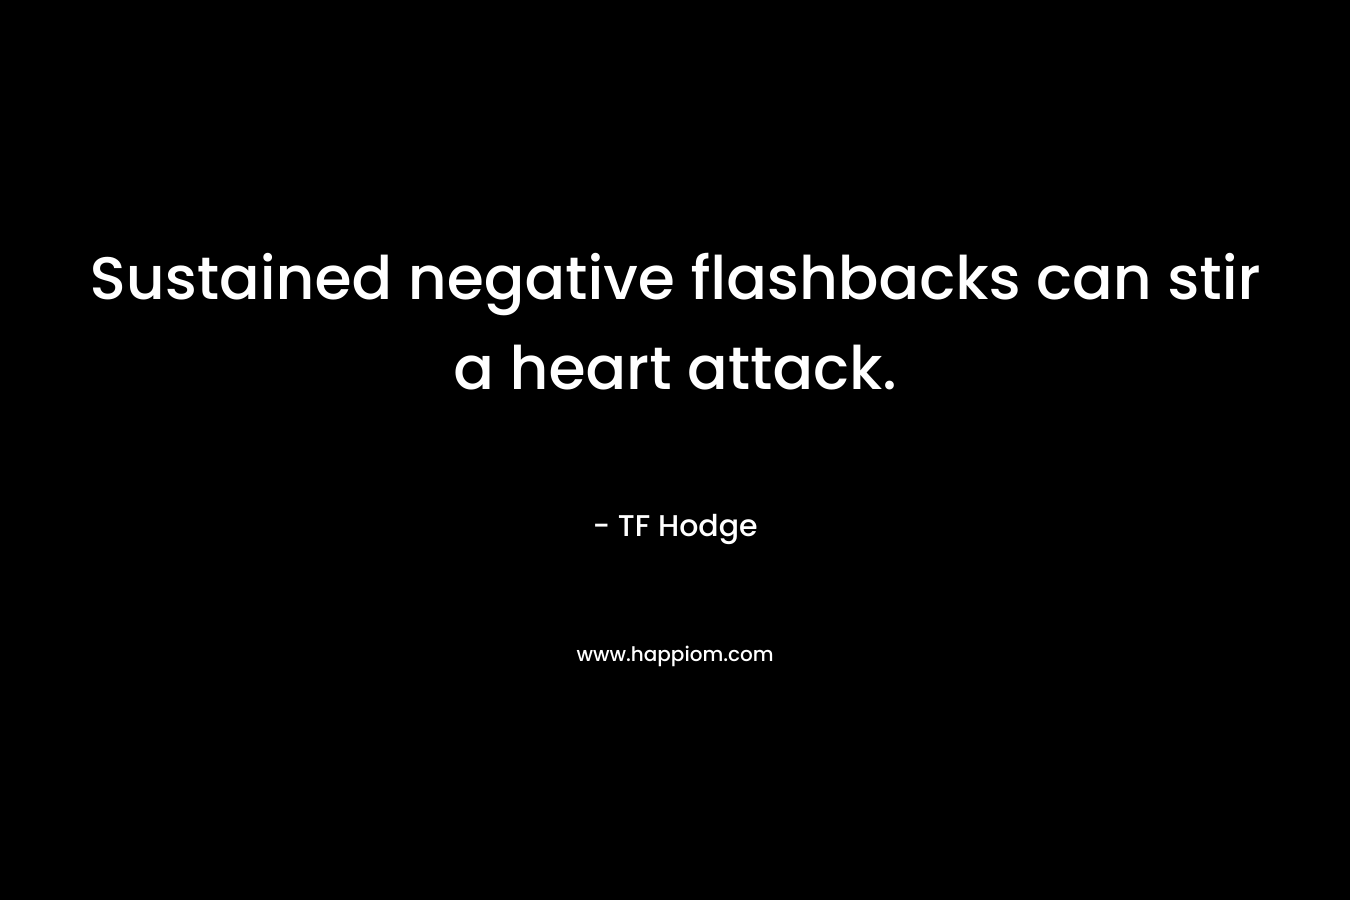 Sustained negative flashbacks can stir a heart attack.